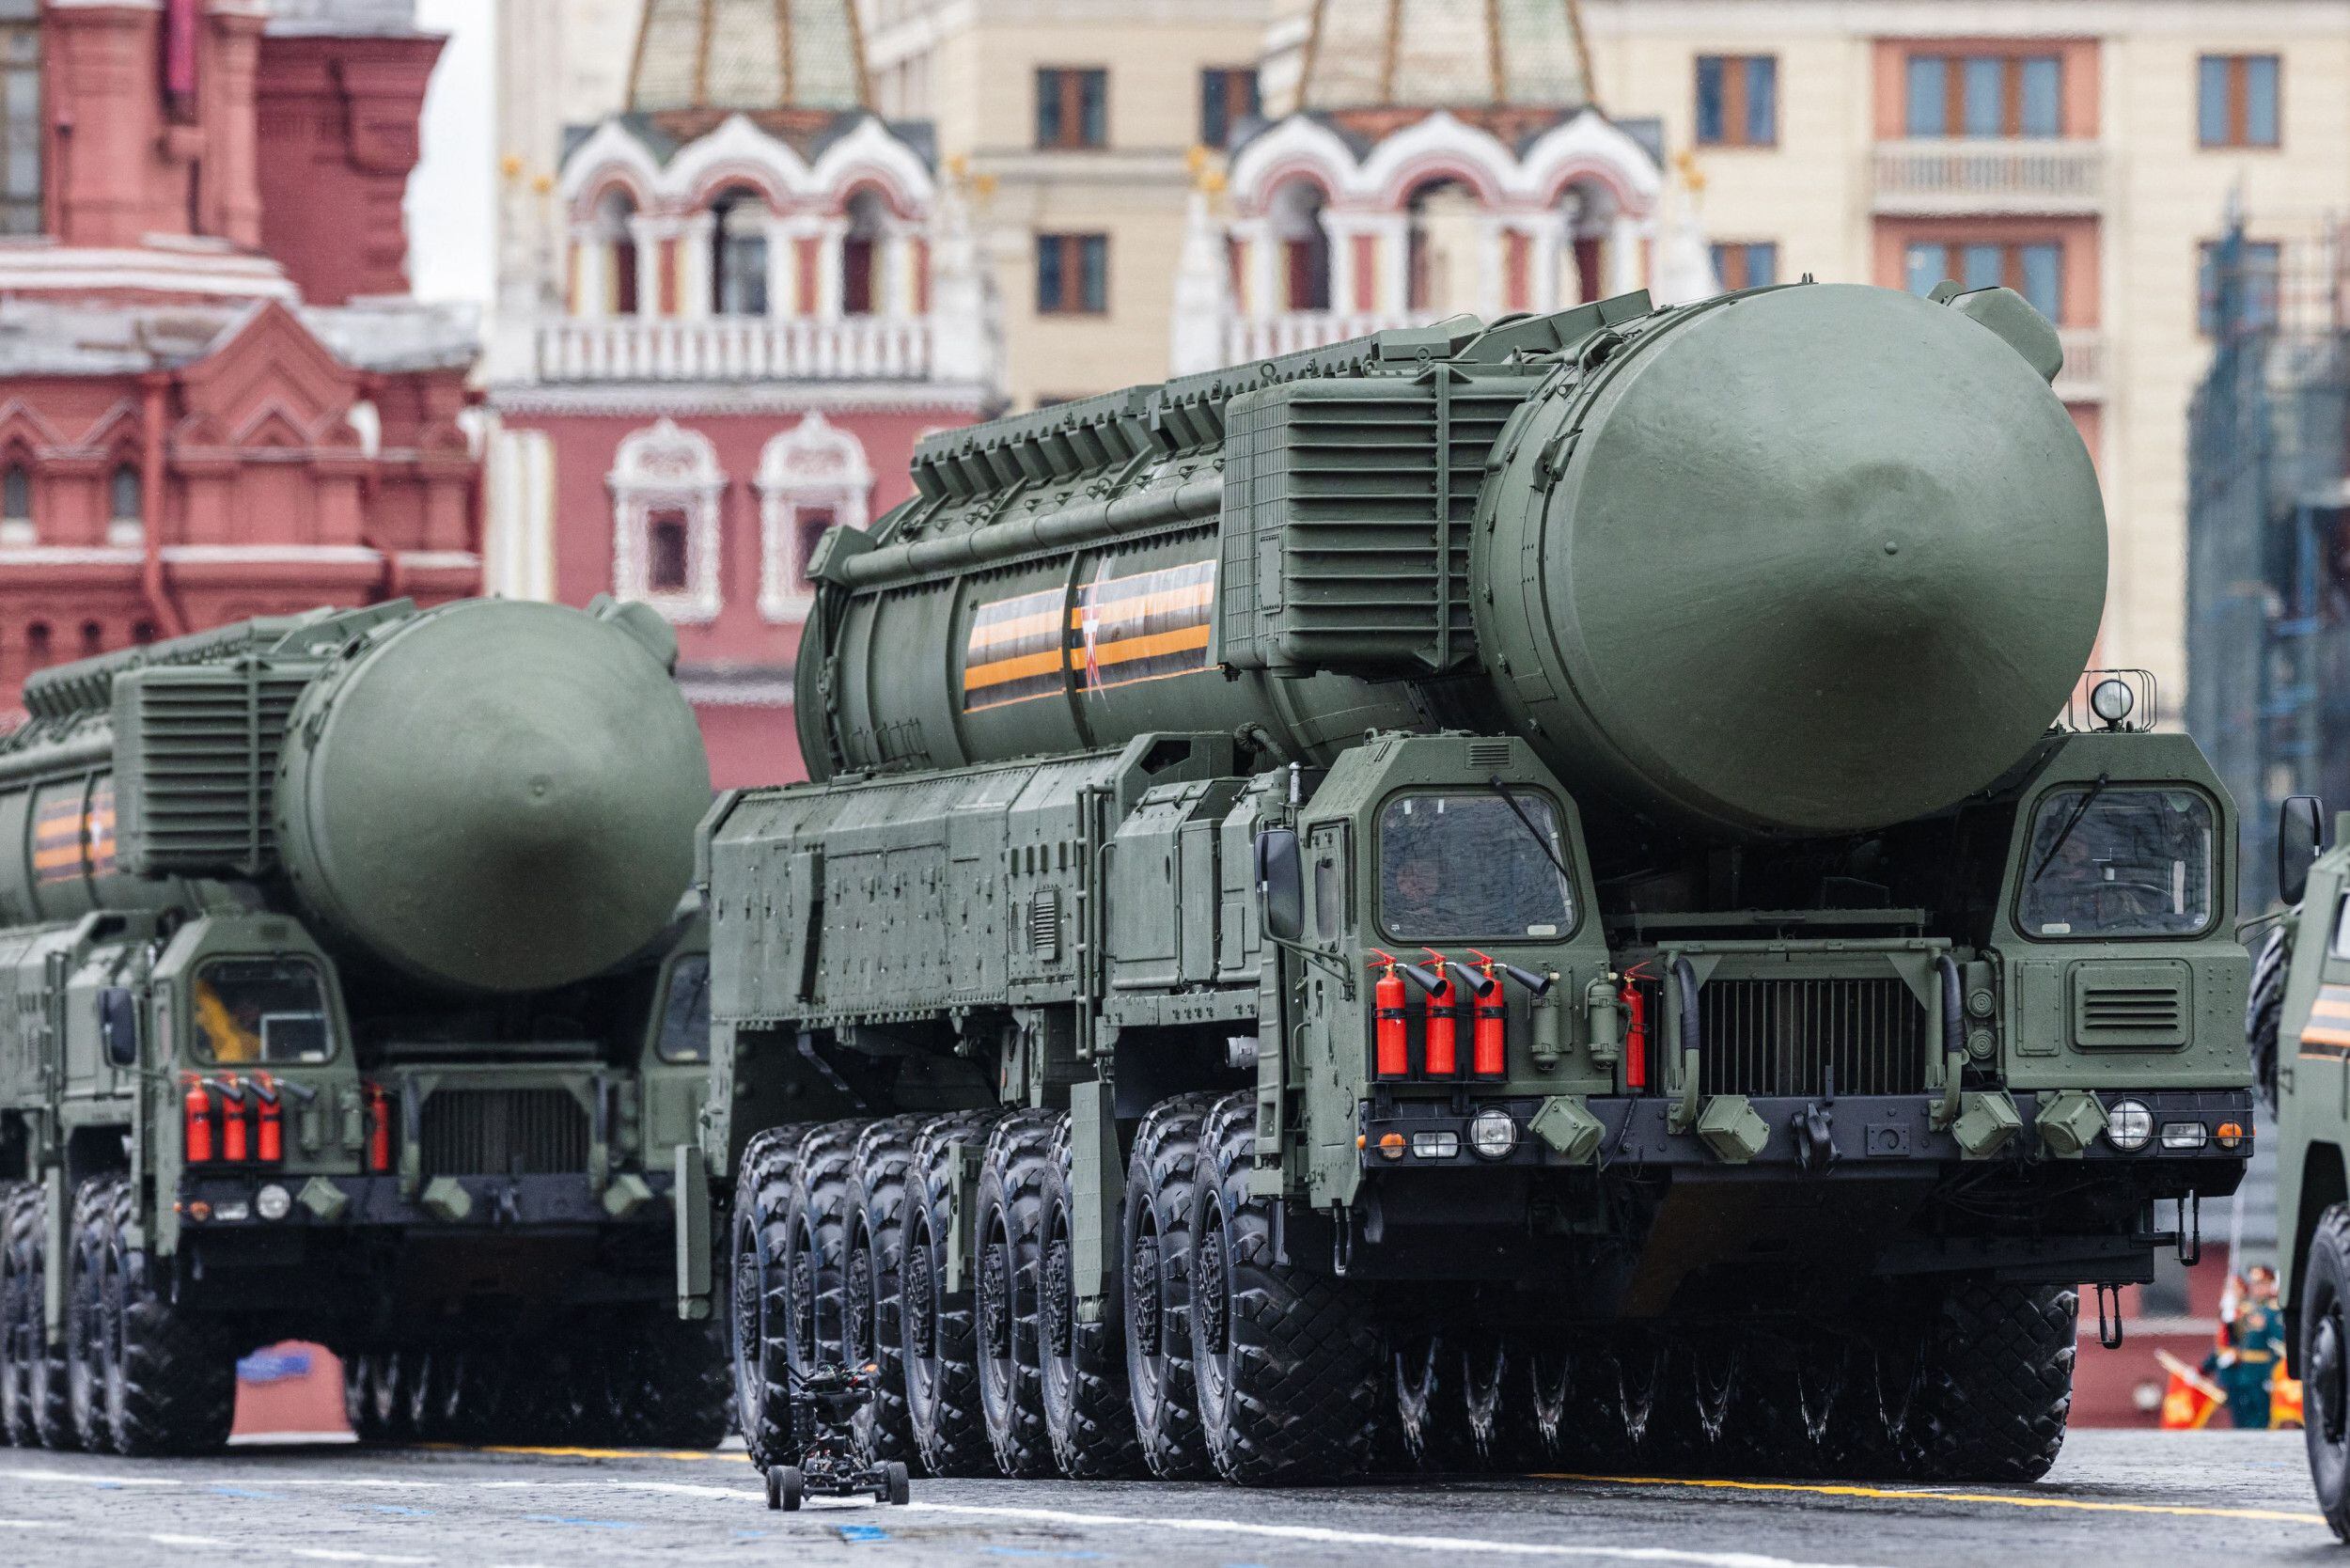 Russian Yars RS-24 ICBM systems pass through Red Square during the Victory Day military parade in Moscow on May 9, 2021. (DIMITAR DILKOFF/AFP/GETTY IMAGES).